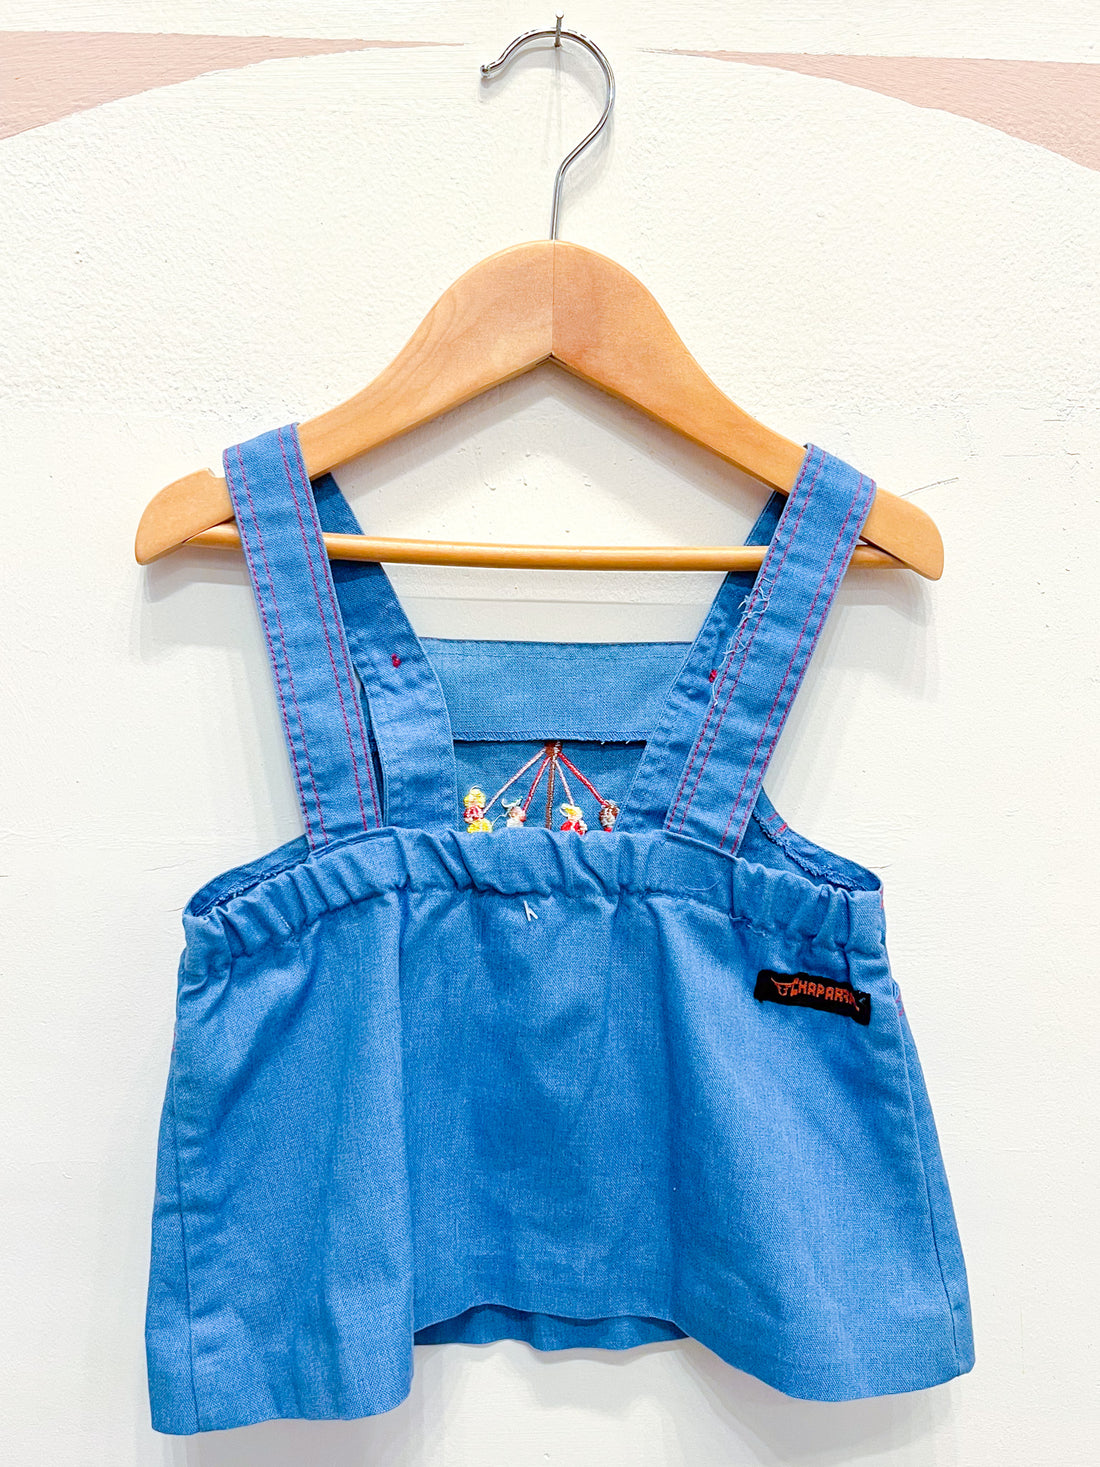 Baby's Vintage Pinafore Dress